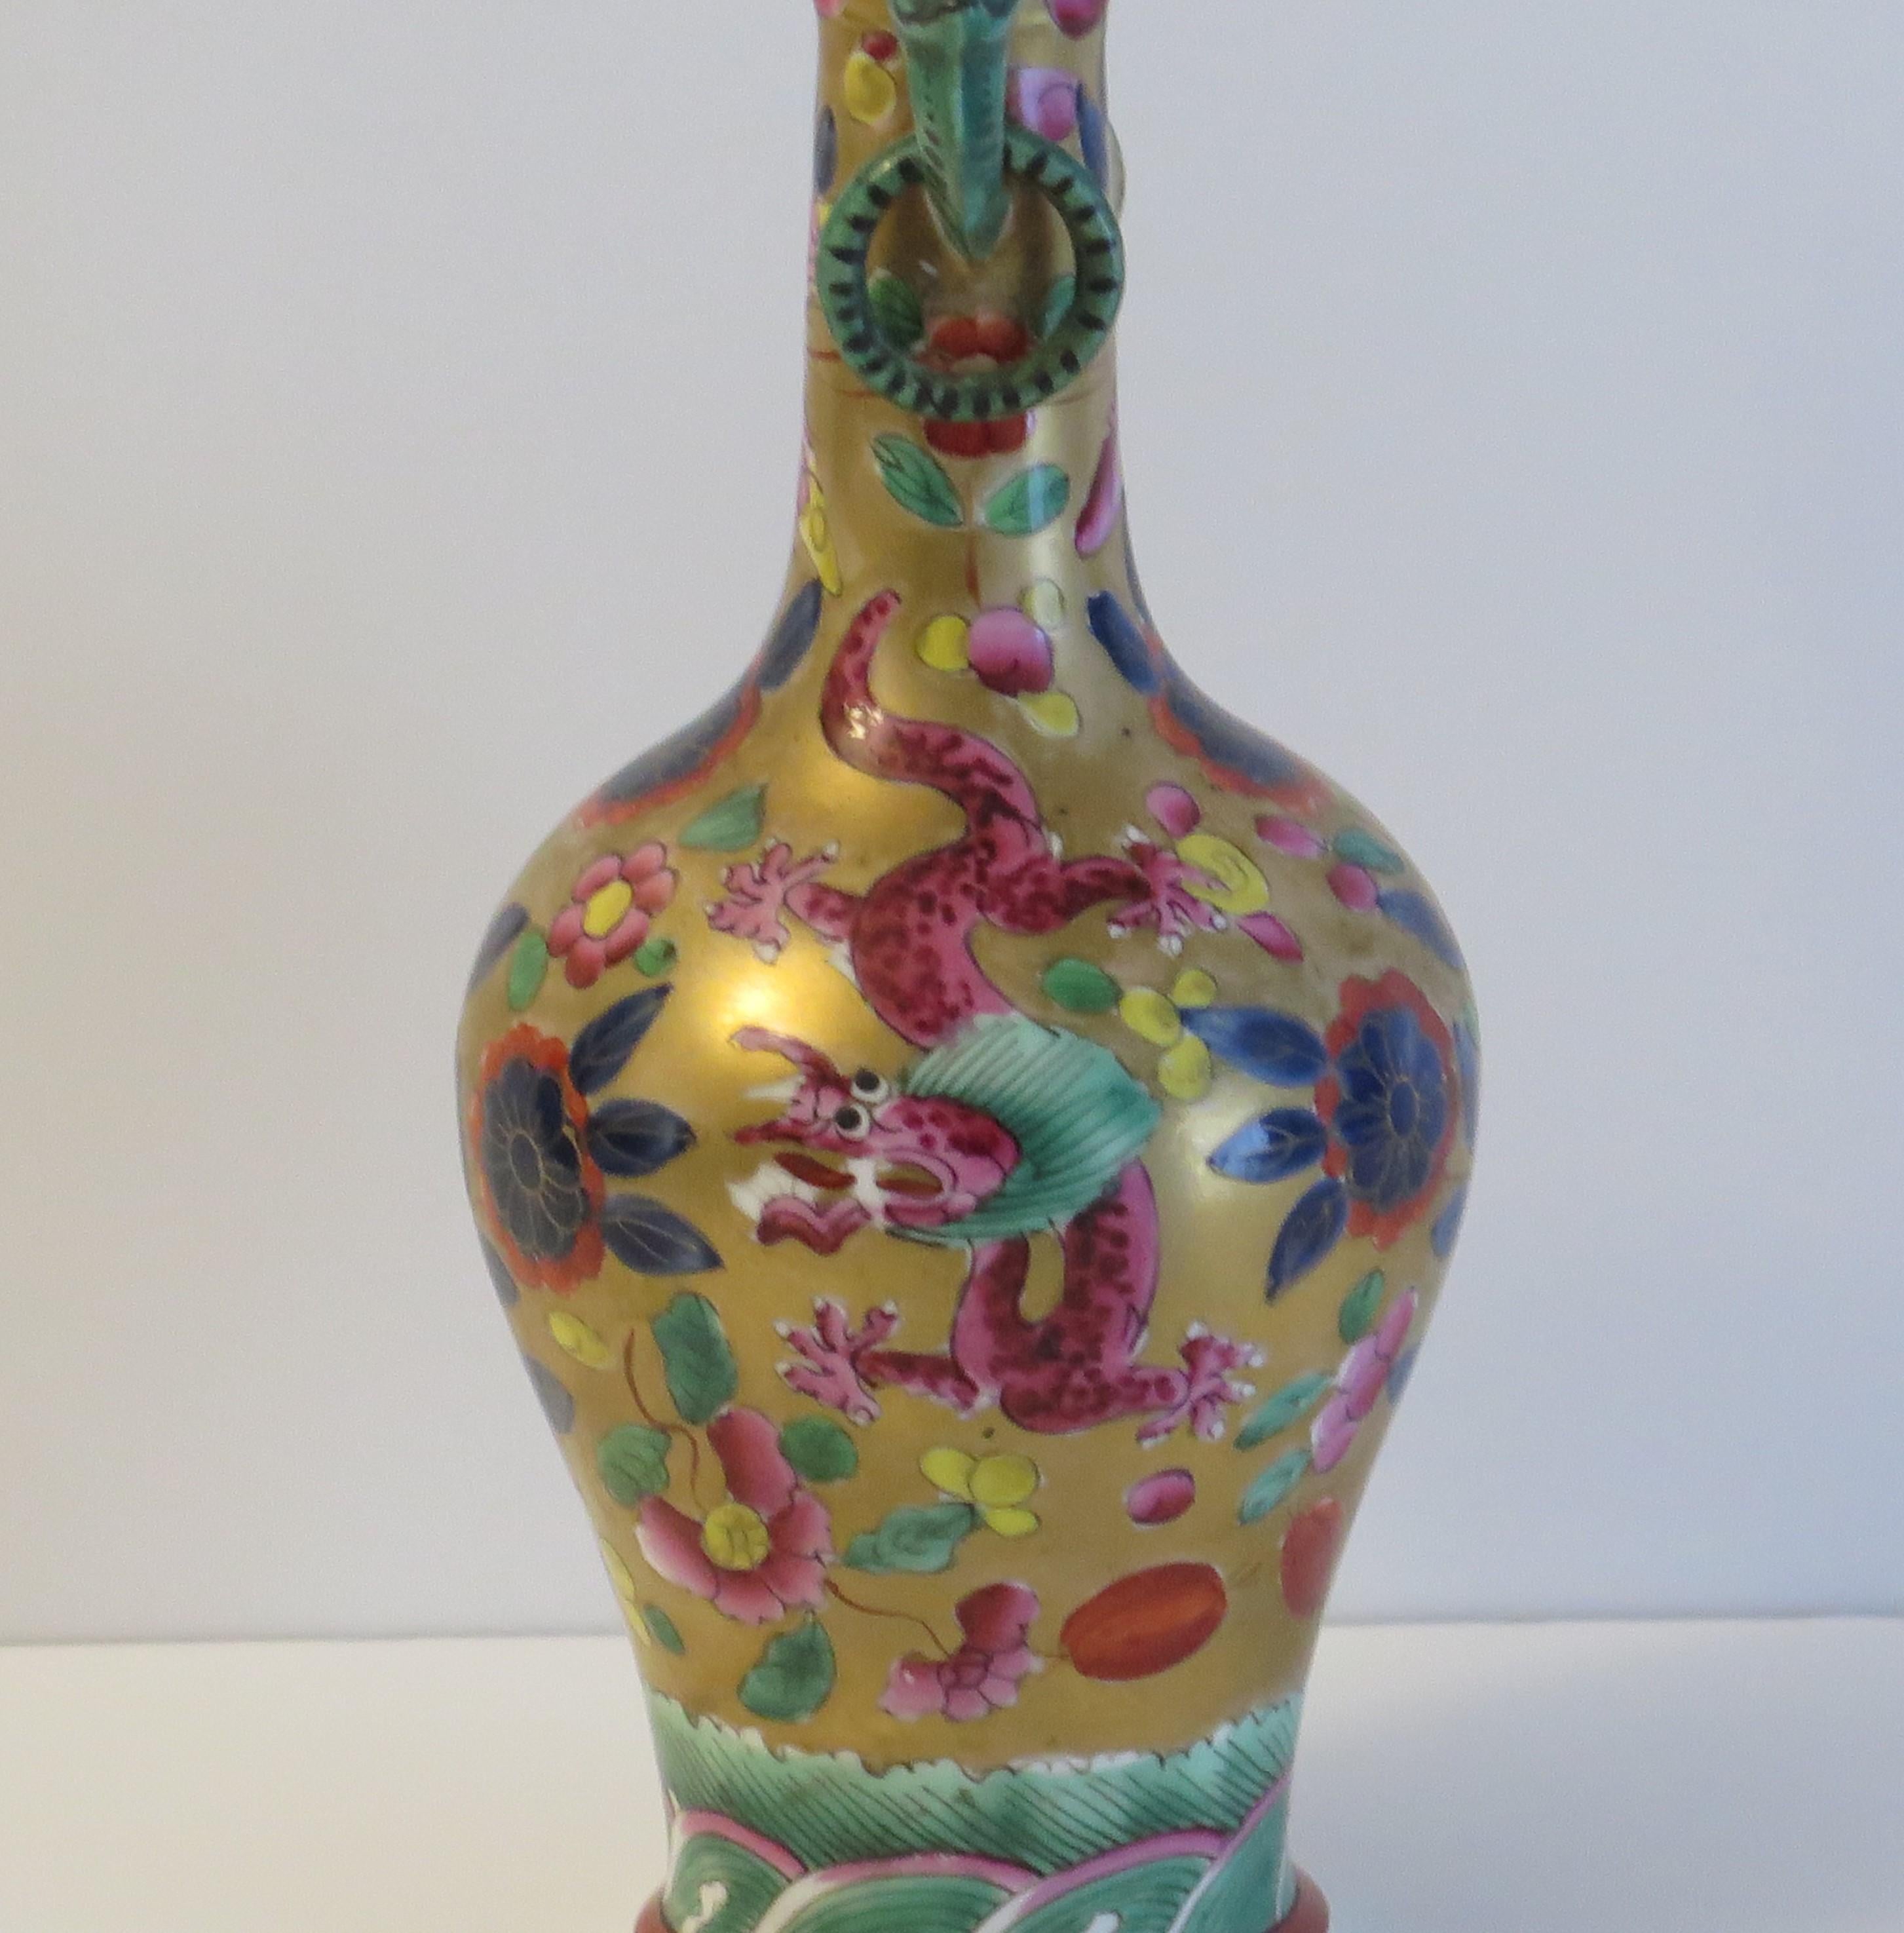 Pottery Very Rare Mason's Ironstone Bottle Vase in Chinese Dragon Pattern, circa 1820 For Sale